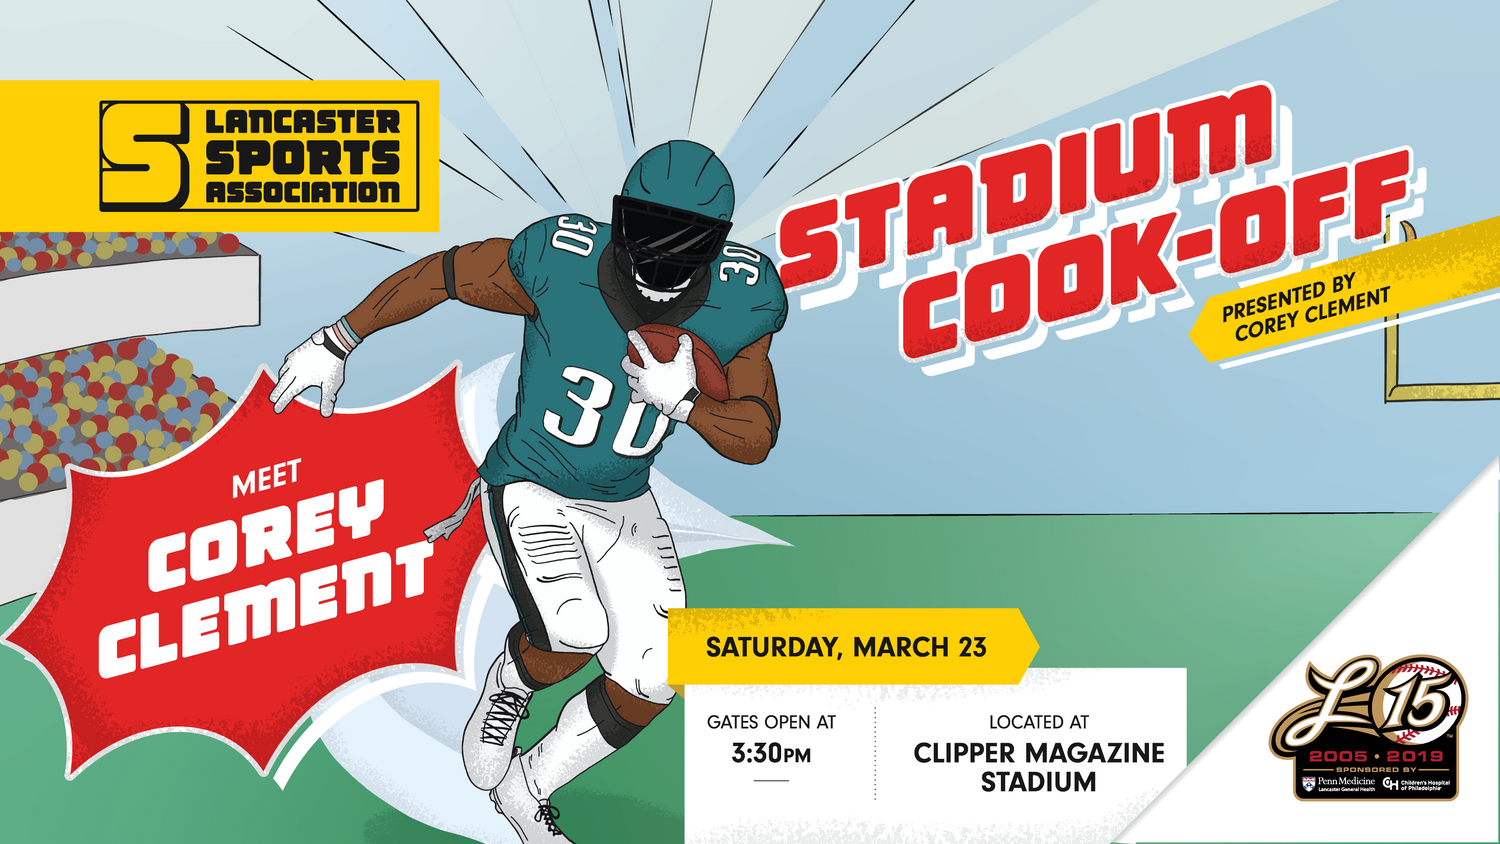 Here's How you can Meet Corey Clement on March 23rd